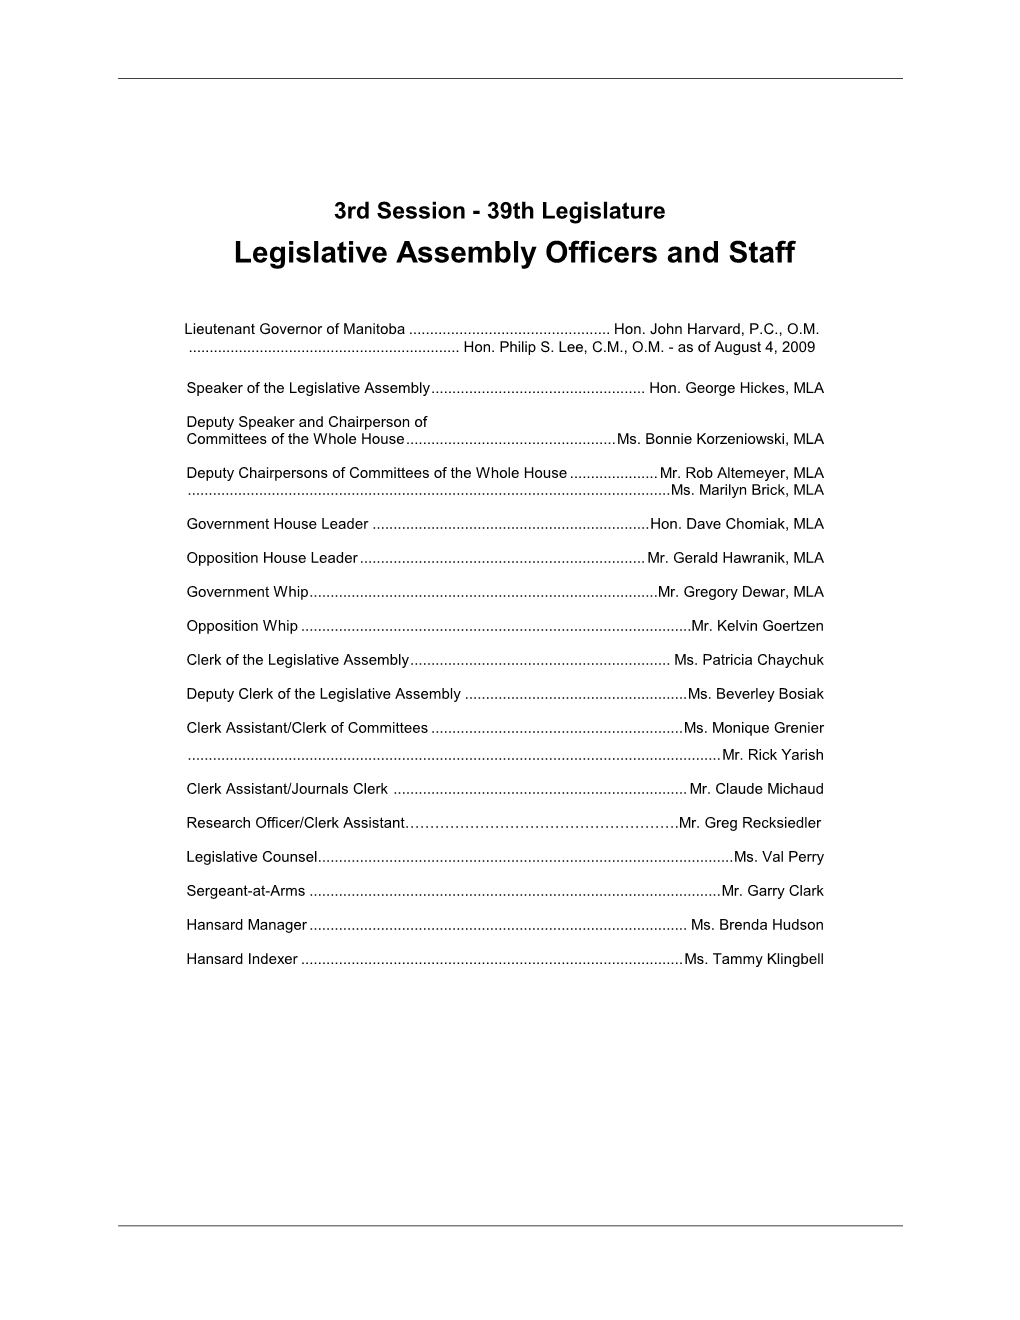 Legislative Assembly Officers and Staff